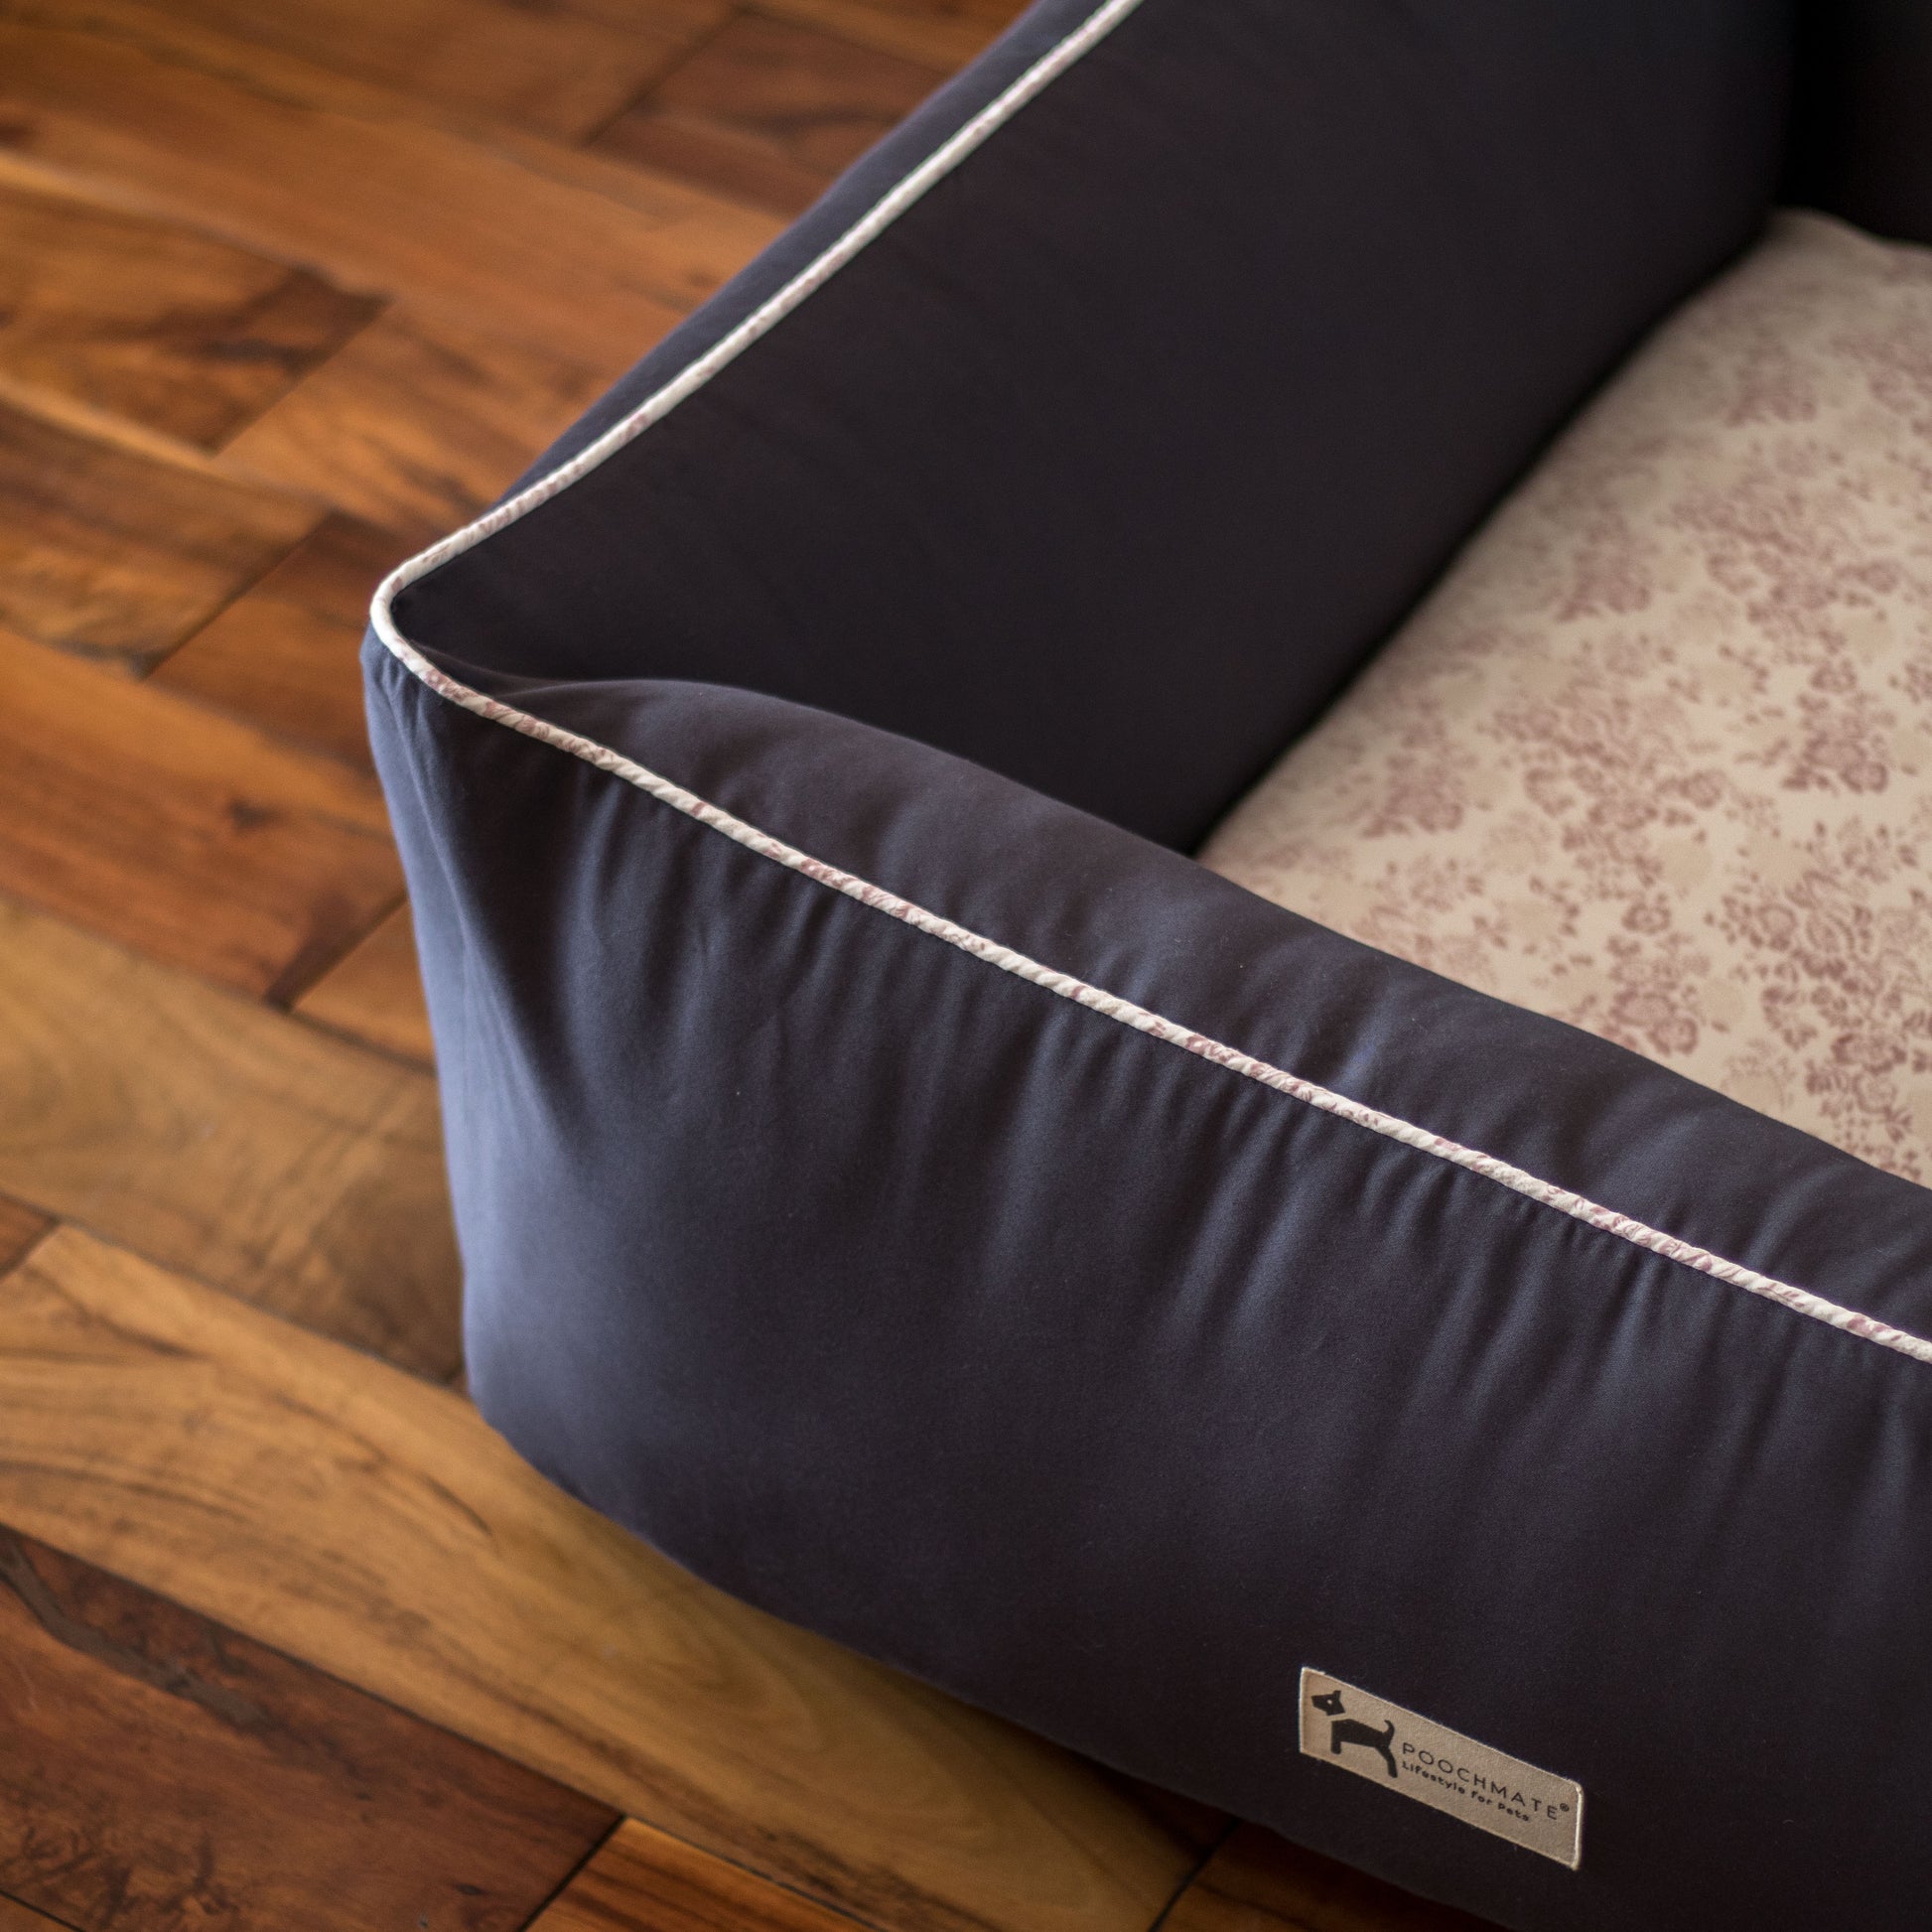 Best dog beds with washable covers Dubai